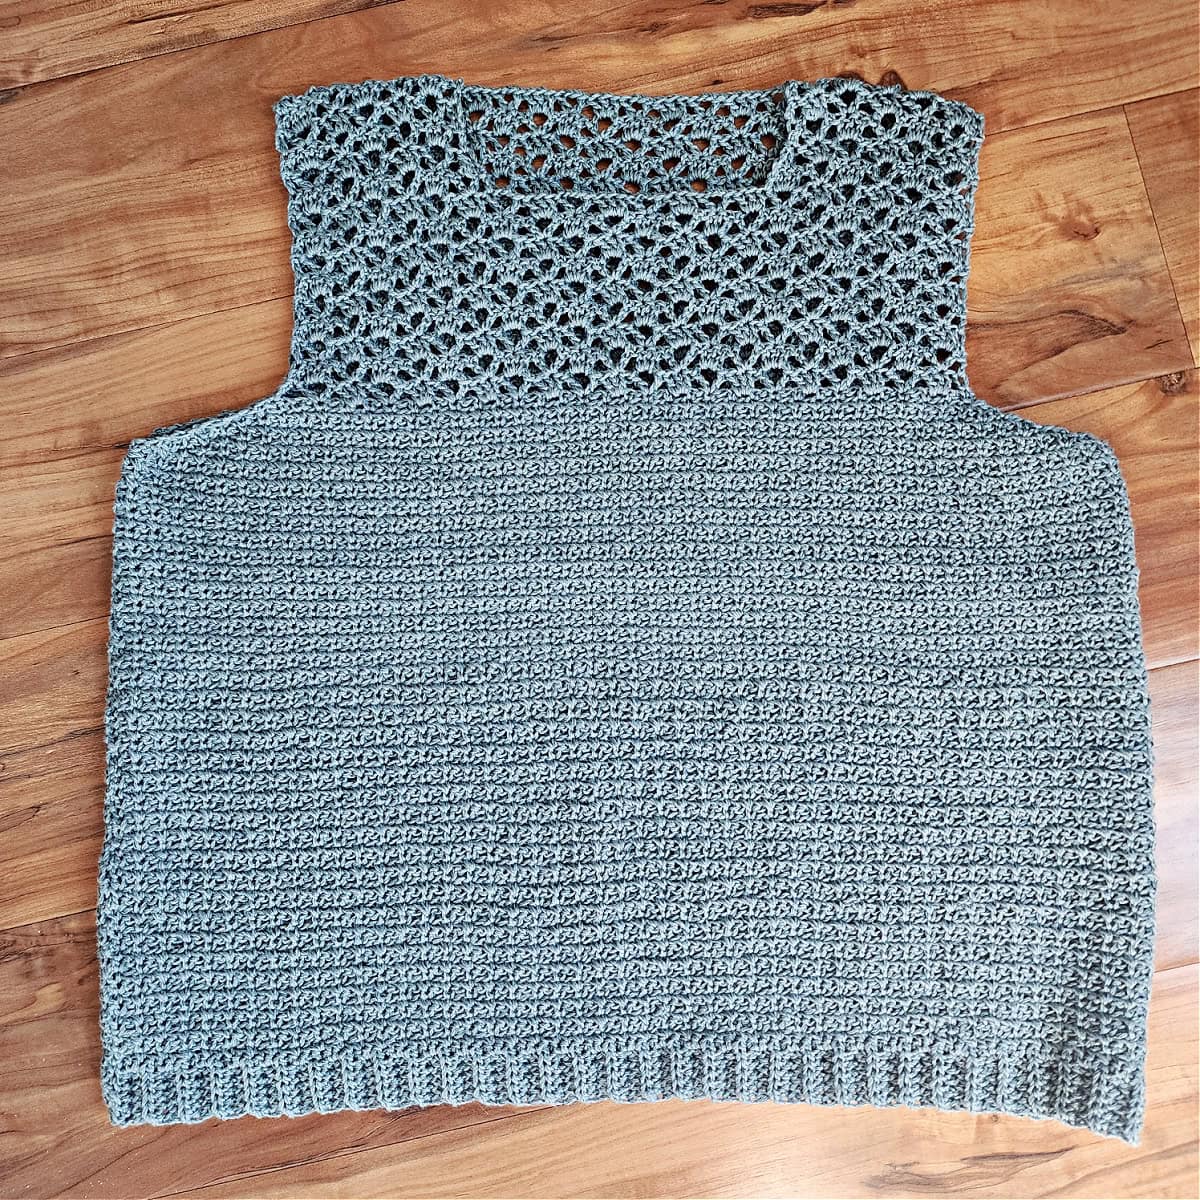 The front and back panels of a lightweight crochet summer top seamed at the shoulders and sides.